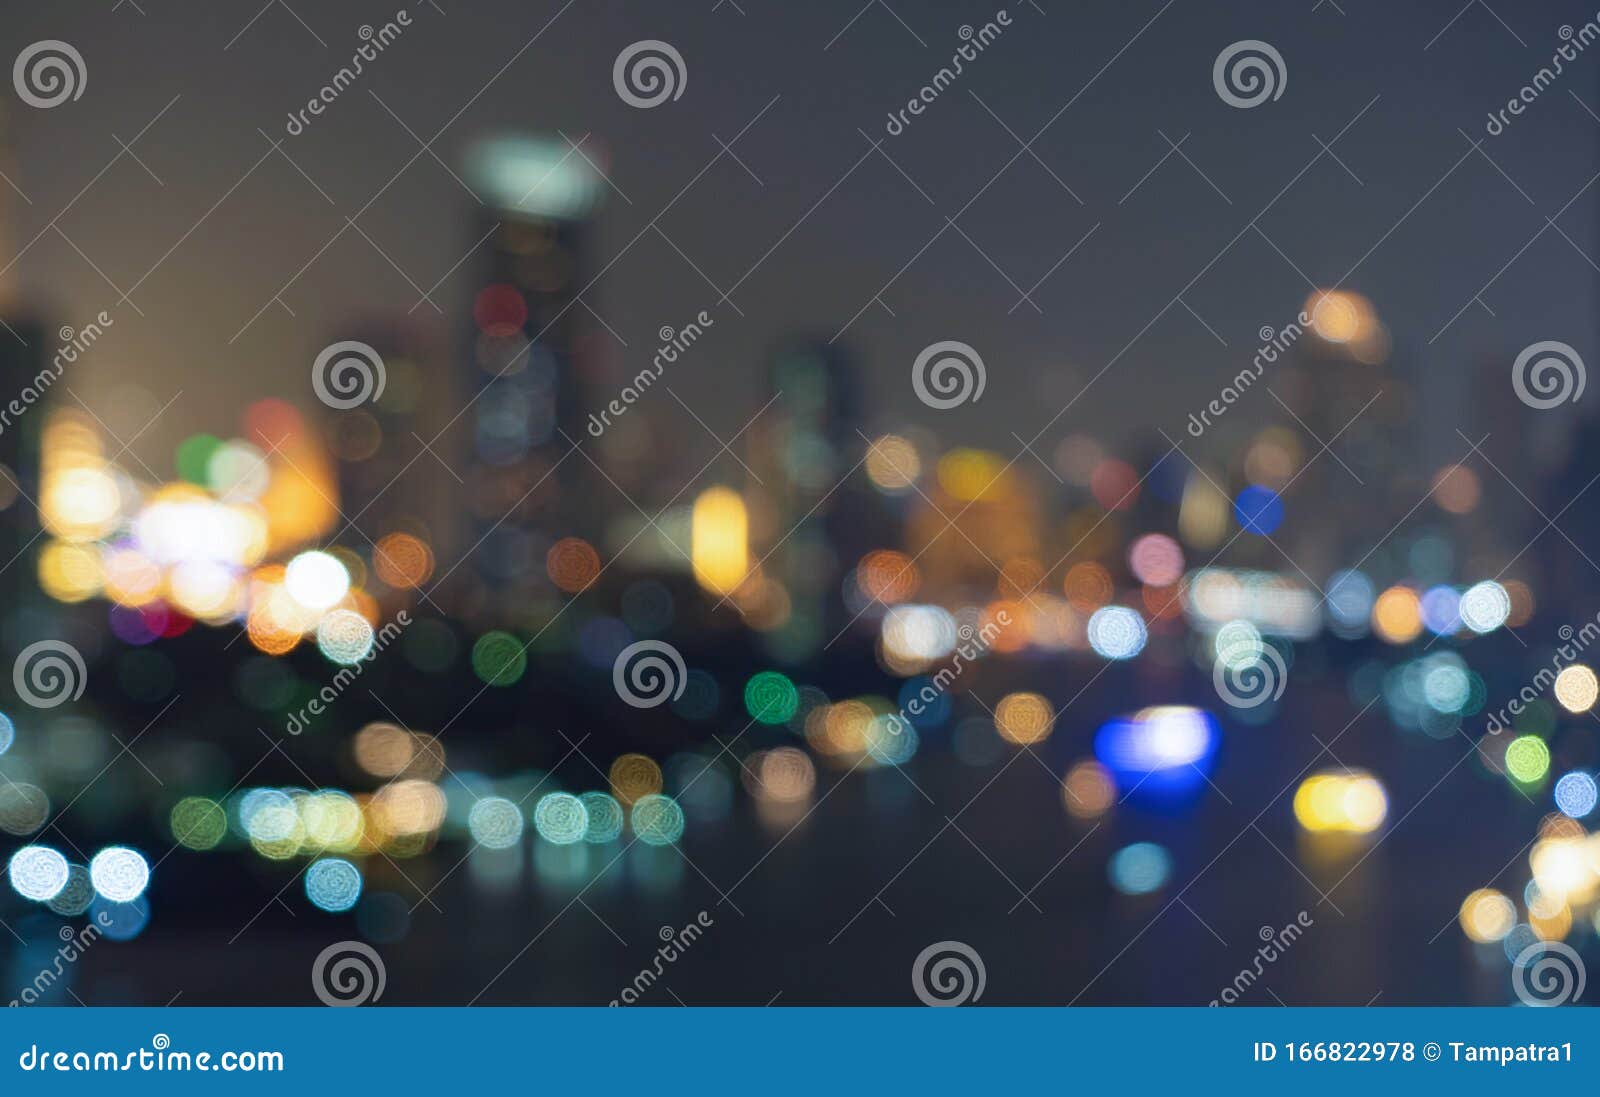 bokeh background of skyscraper buildings in downtown. urban city with lights, blurry photo at night time.  illuminated cityscape